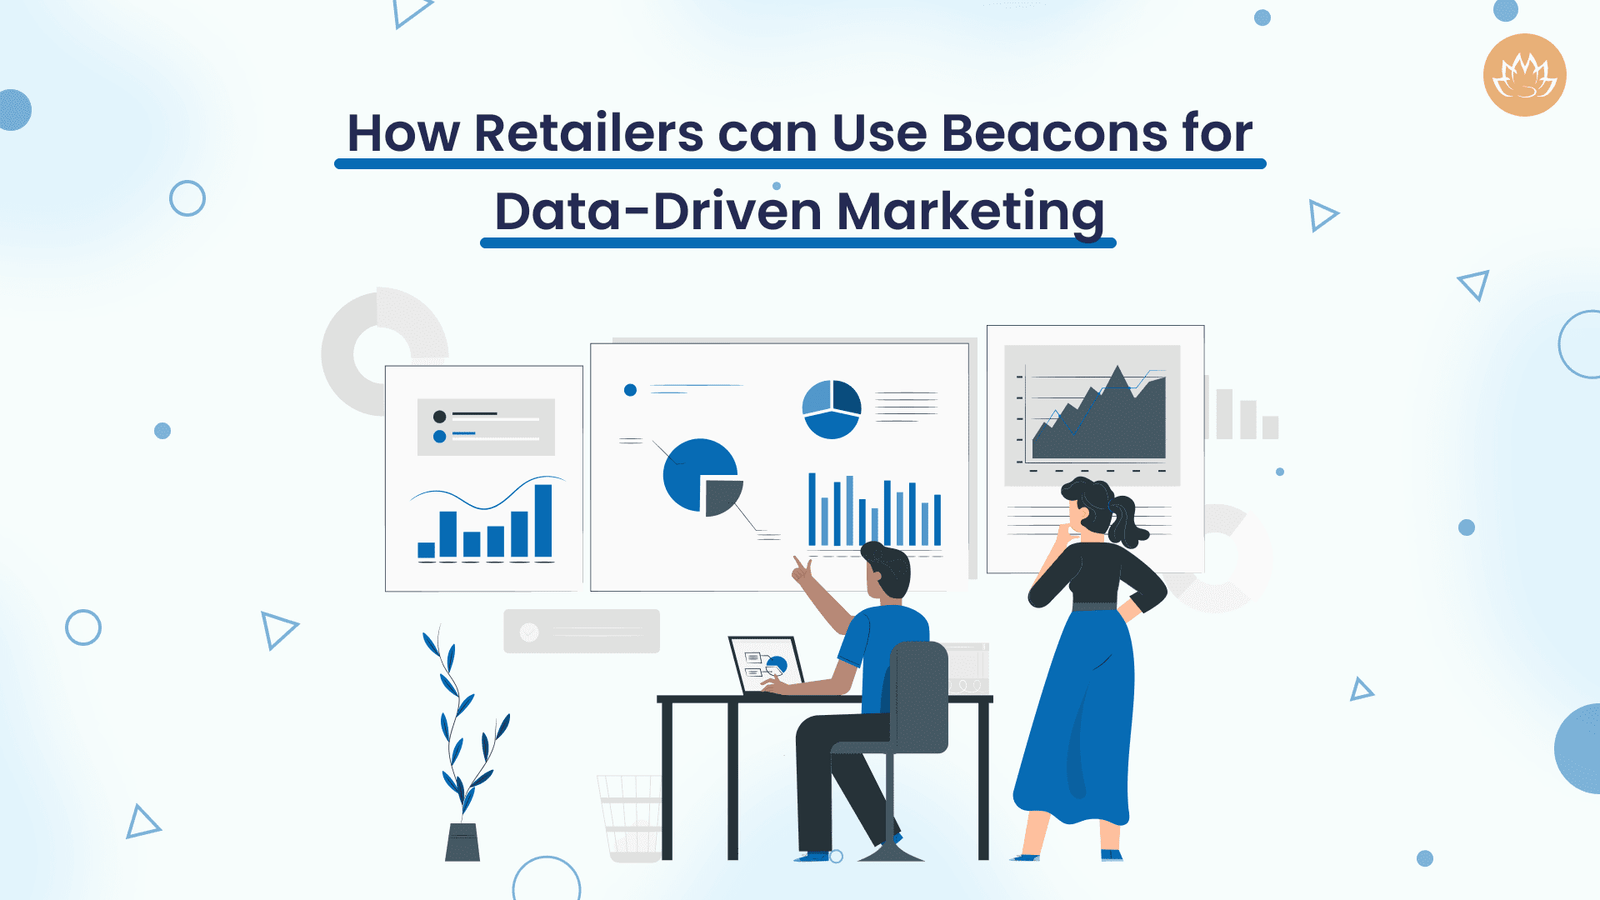 How Retailers can Use Beacons for Data-Driven Marketing